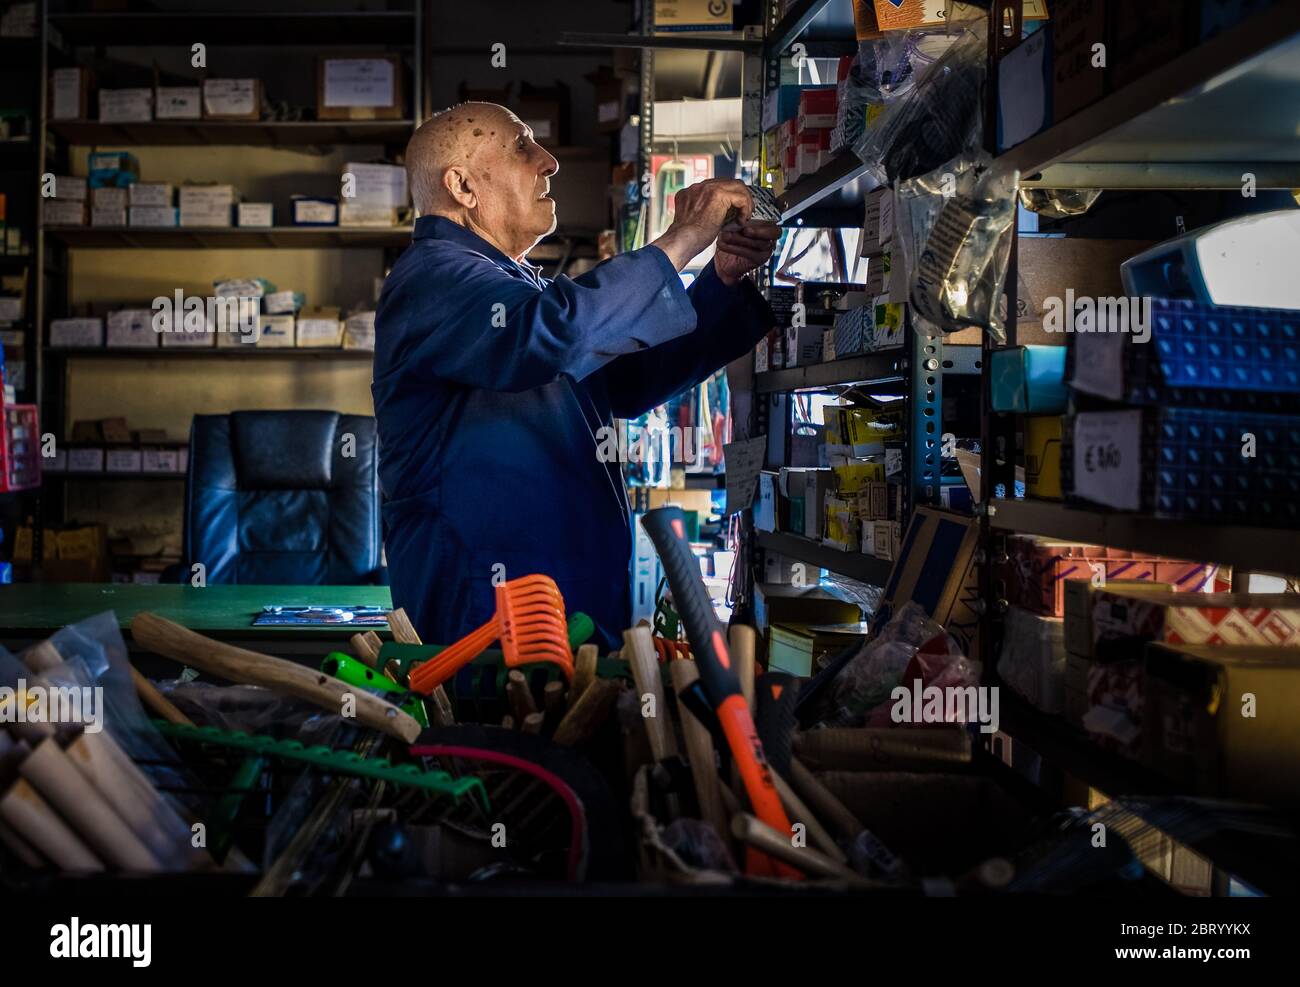 https://c8.alamy.com/comp/2BRYYKX/an-ironmonger-elderly-man-in-a-boiler-suit-searching-through-shelves-stacked-with-useful-household-items-and-tools-2BRYYKX.jpg